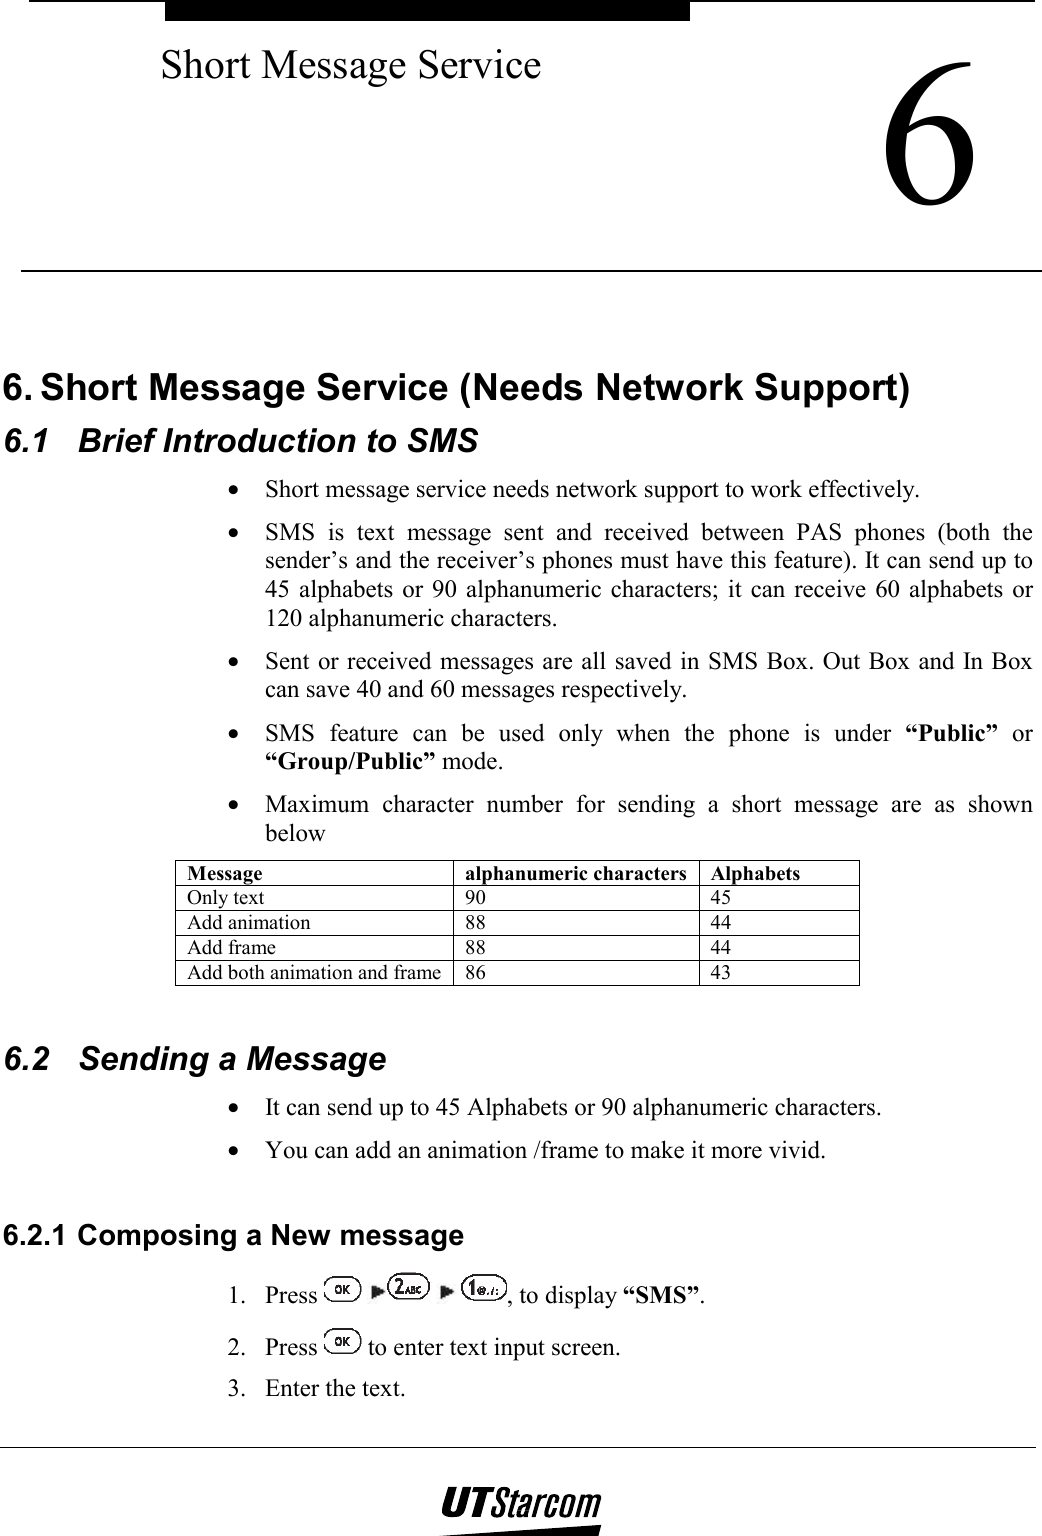  6 Short Message Service    6. Short Message Service (Needs Network Support) 6.1  Brief Introduction to SMS •  Short message service needs network support to work effectively. •  SMS is text message sent and received between PAS phones (both the sender’s and the receiver’s phones must have this feature). It can send up to 45 alphabets or 90 alphanumeric characters; it can receive 60 alphabets or 120 alphanumeric characters. •  Sent or received messages are all saved in SMS Box. Out Box and In Box can save 40 and 60 messages respectively. •  SMS feature can be used only when the phone is under “Public” or “Group/Public” mode. •  Maximum character number for sending a short message are as shown below Message alphanumeric characters Alphabets Only text  90  45 Add animation  88  44 Add frame  88  44 Add both animation and frame  86  43  6.2  Sending a Message •  It can send up to 45 Alphabets or 90 alphanumeric characters. •  You can add an animation /frame to make it more vivid.  6.2.1 Composing a New message 1. Press        , to display “SMS”. 2. Press   to enter text input screen. 3.  Enter the text. 